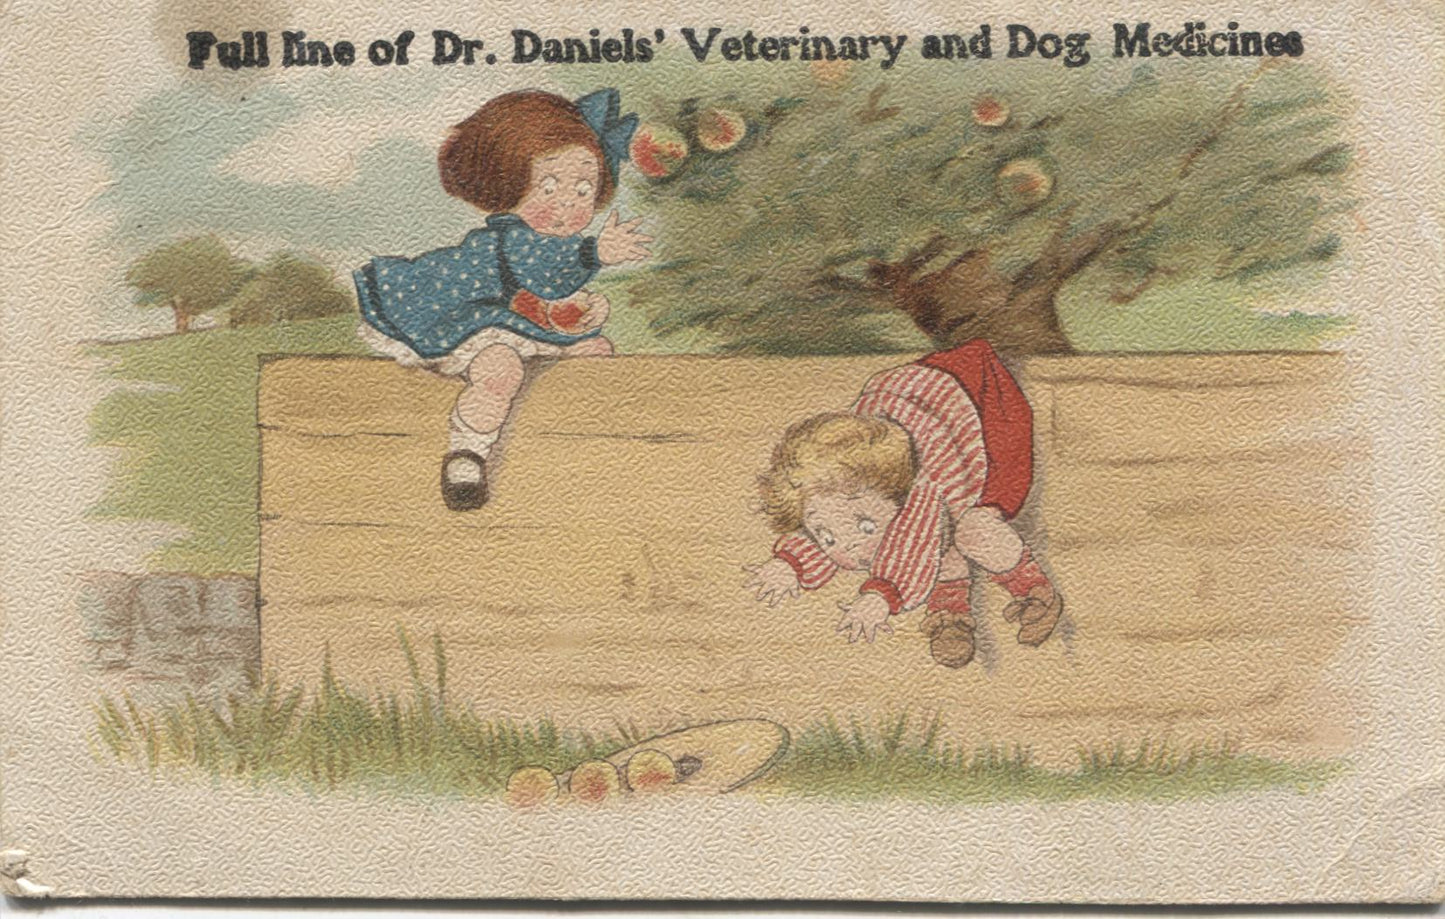 Dr. Daniels' Veterinary and Dog Medicine Antique Trade Card - 5.5" x 3.5"